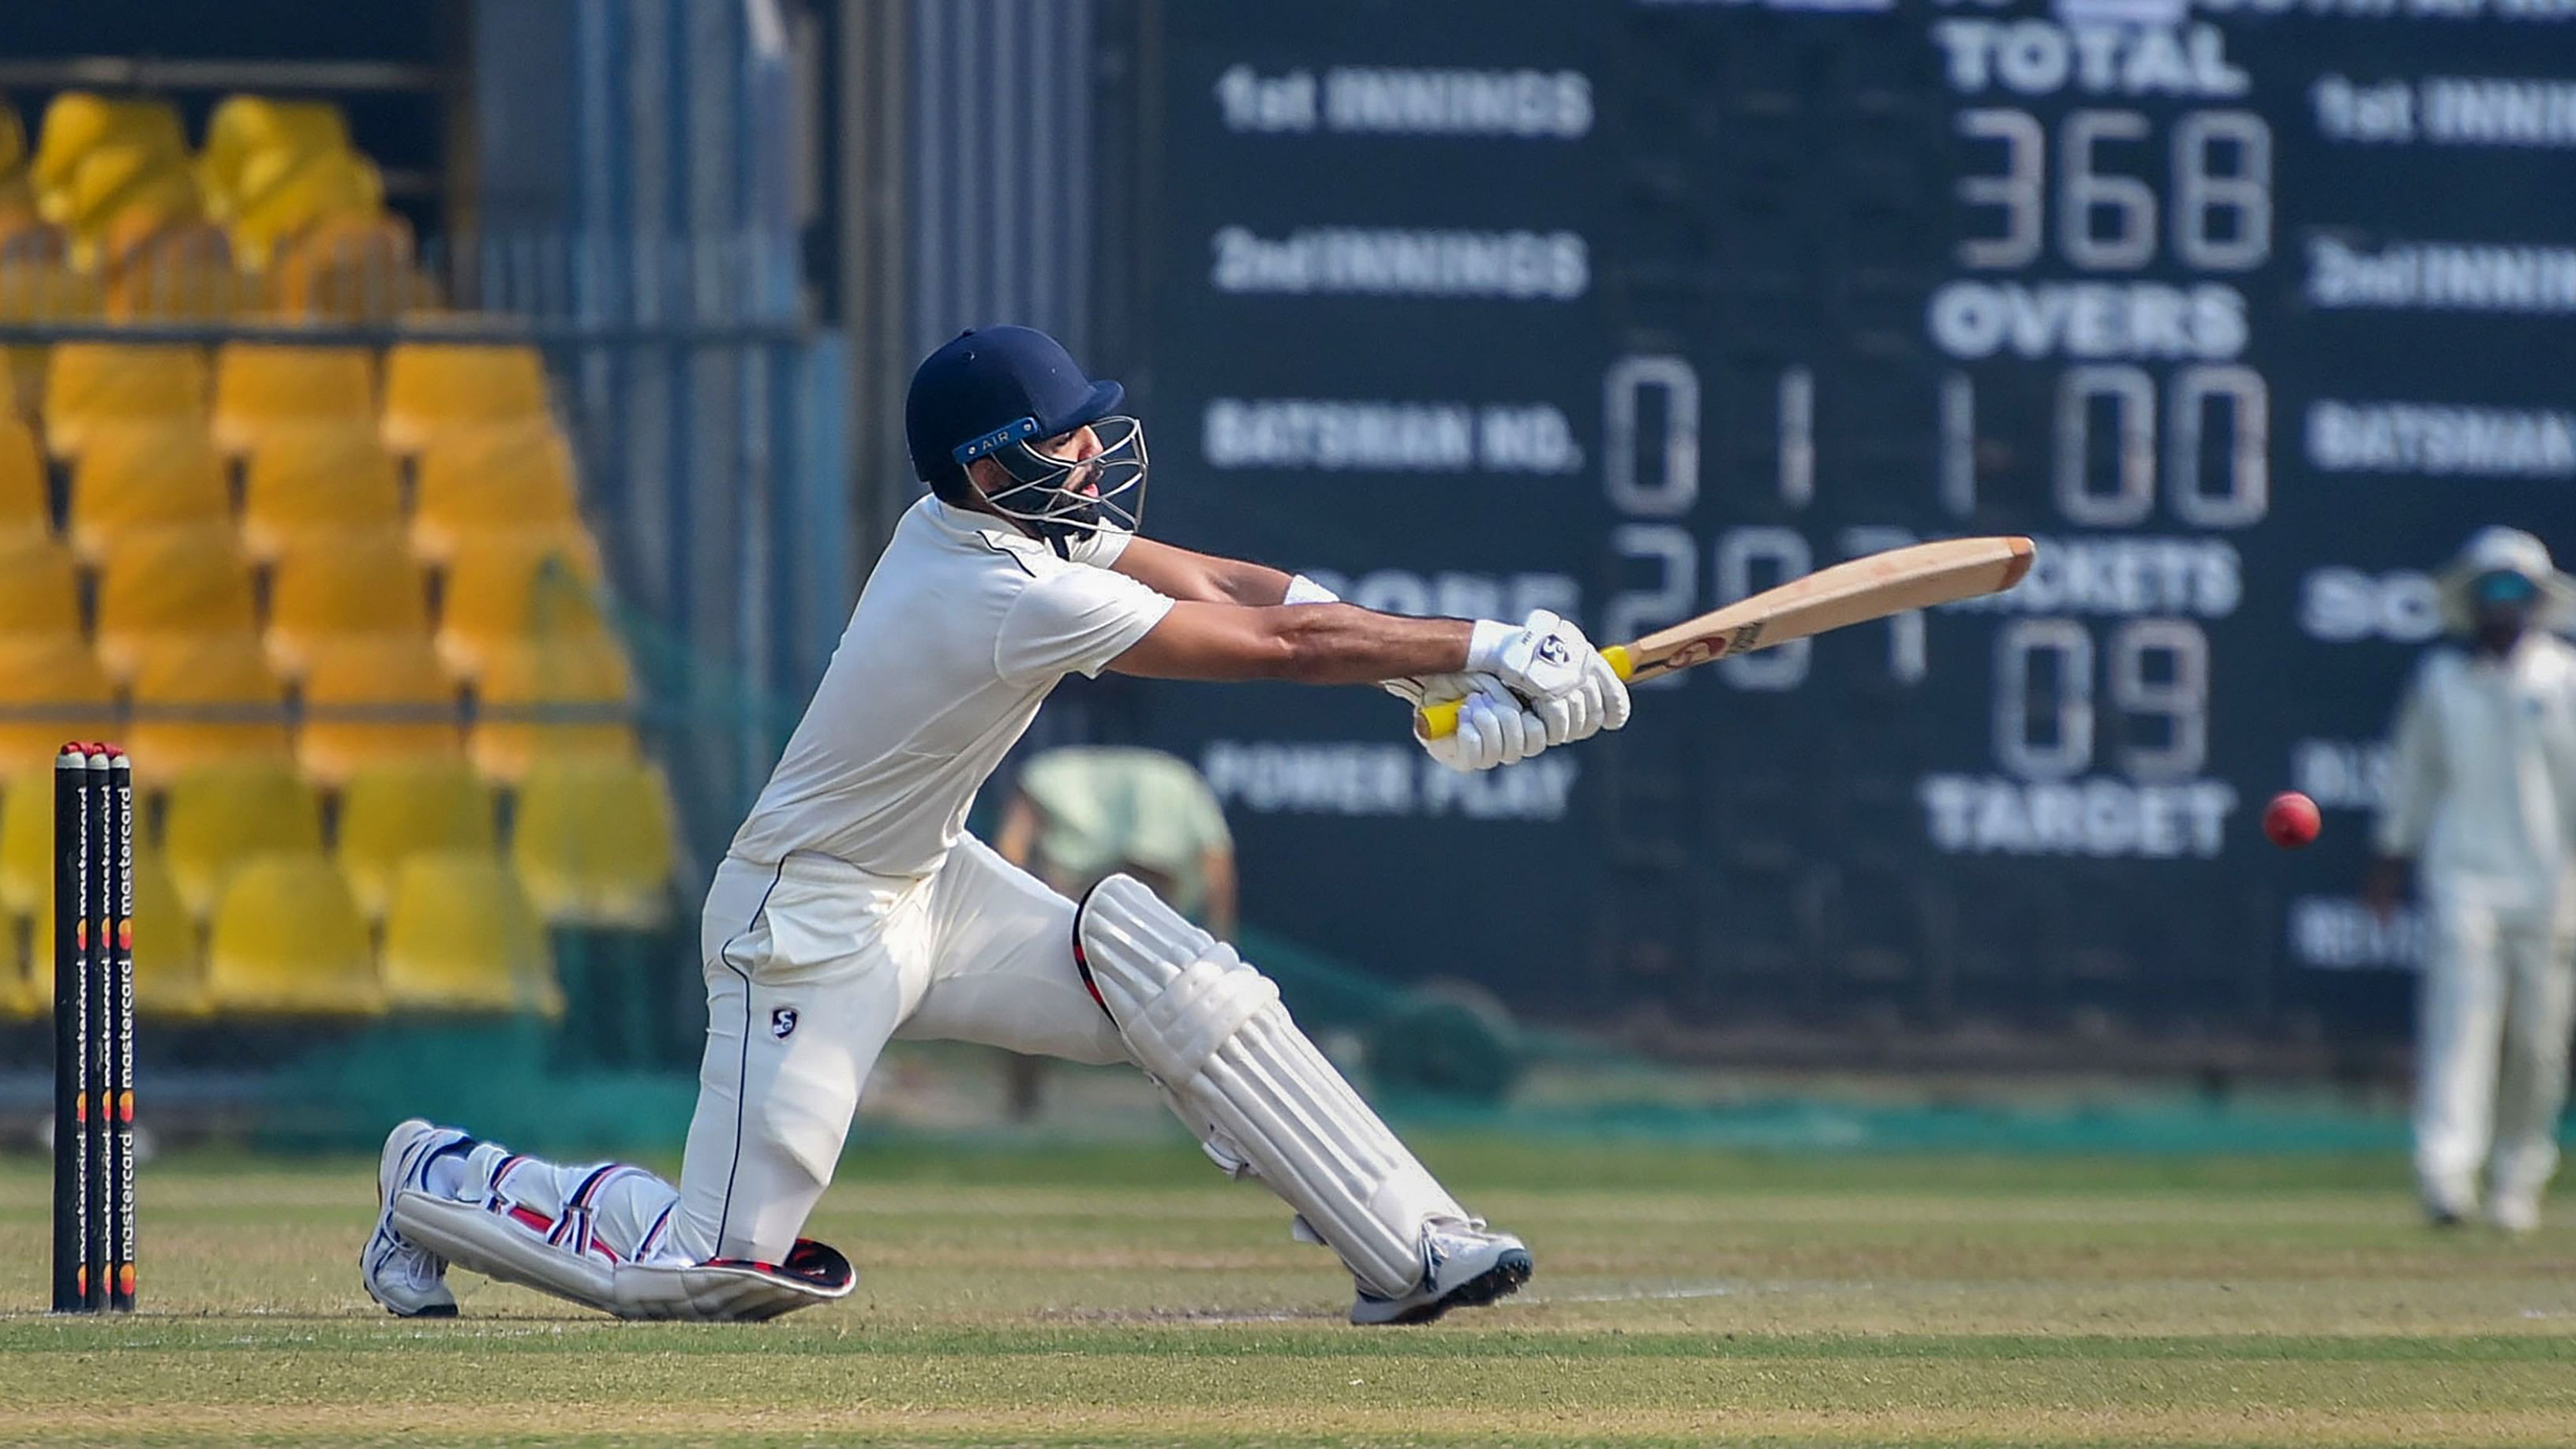 Delhi batsman Dhruv Shorey plays a shot during the 2nd day of the Ranji trophy cricket match against Assam, at ACA Stadium in Guwahati, Wednesday, Dec. 21, 2022. Credit: PTI Photo